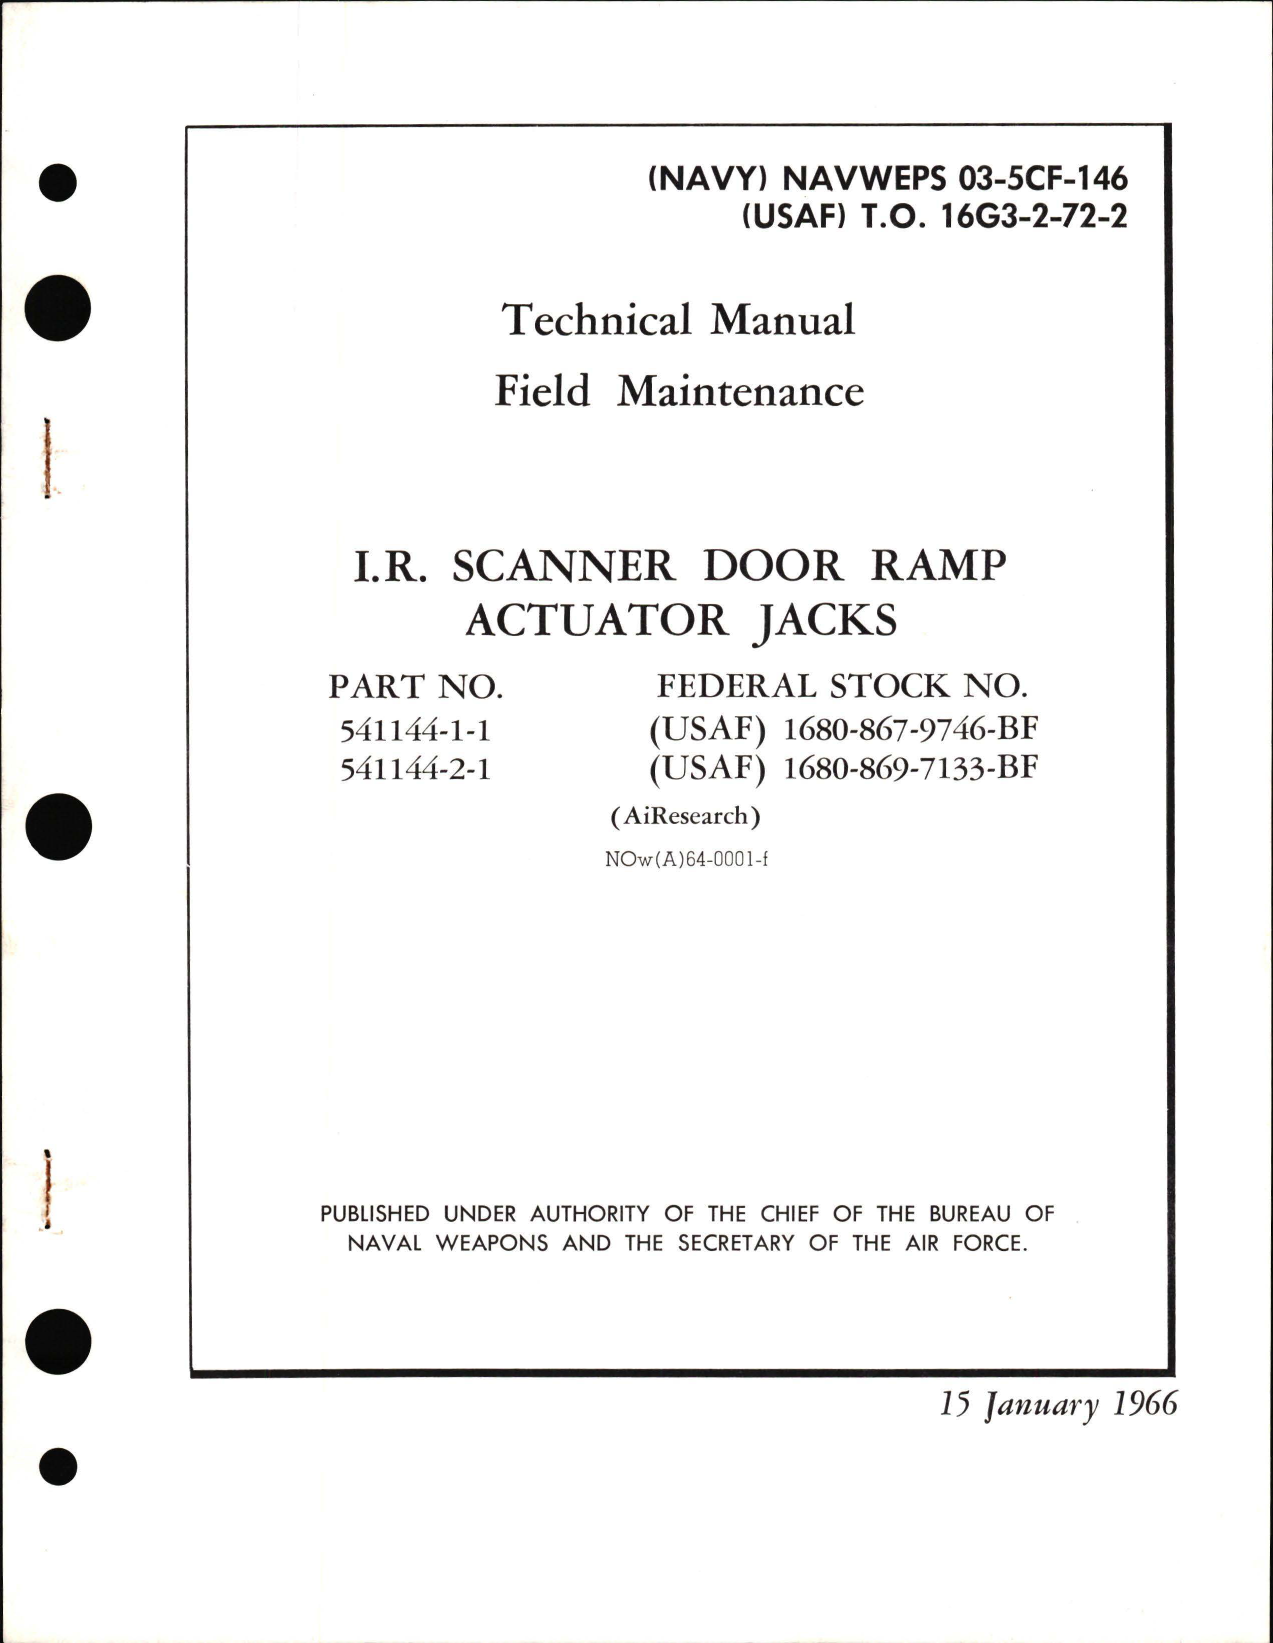 Sample page 1 from AirCorps Library document: Field Maintenance for I.R. Scanner Door Ramp Actuator Jacks - Part 541144-1-1 and 541144-2-1 